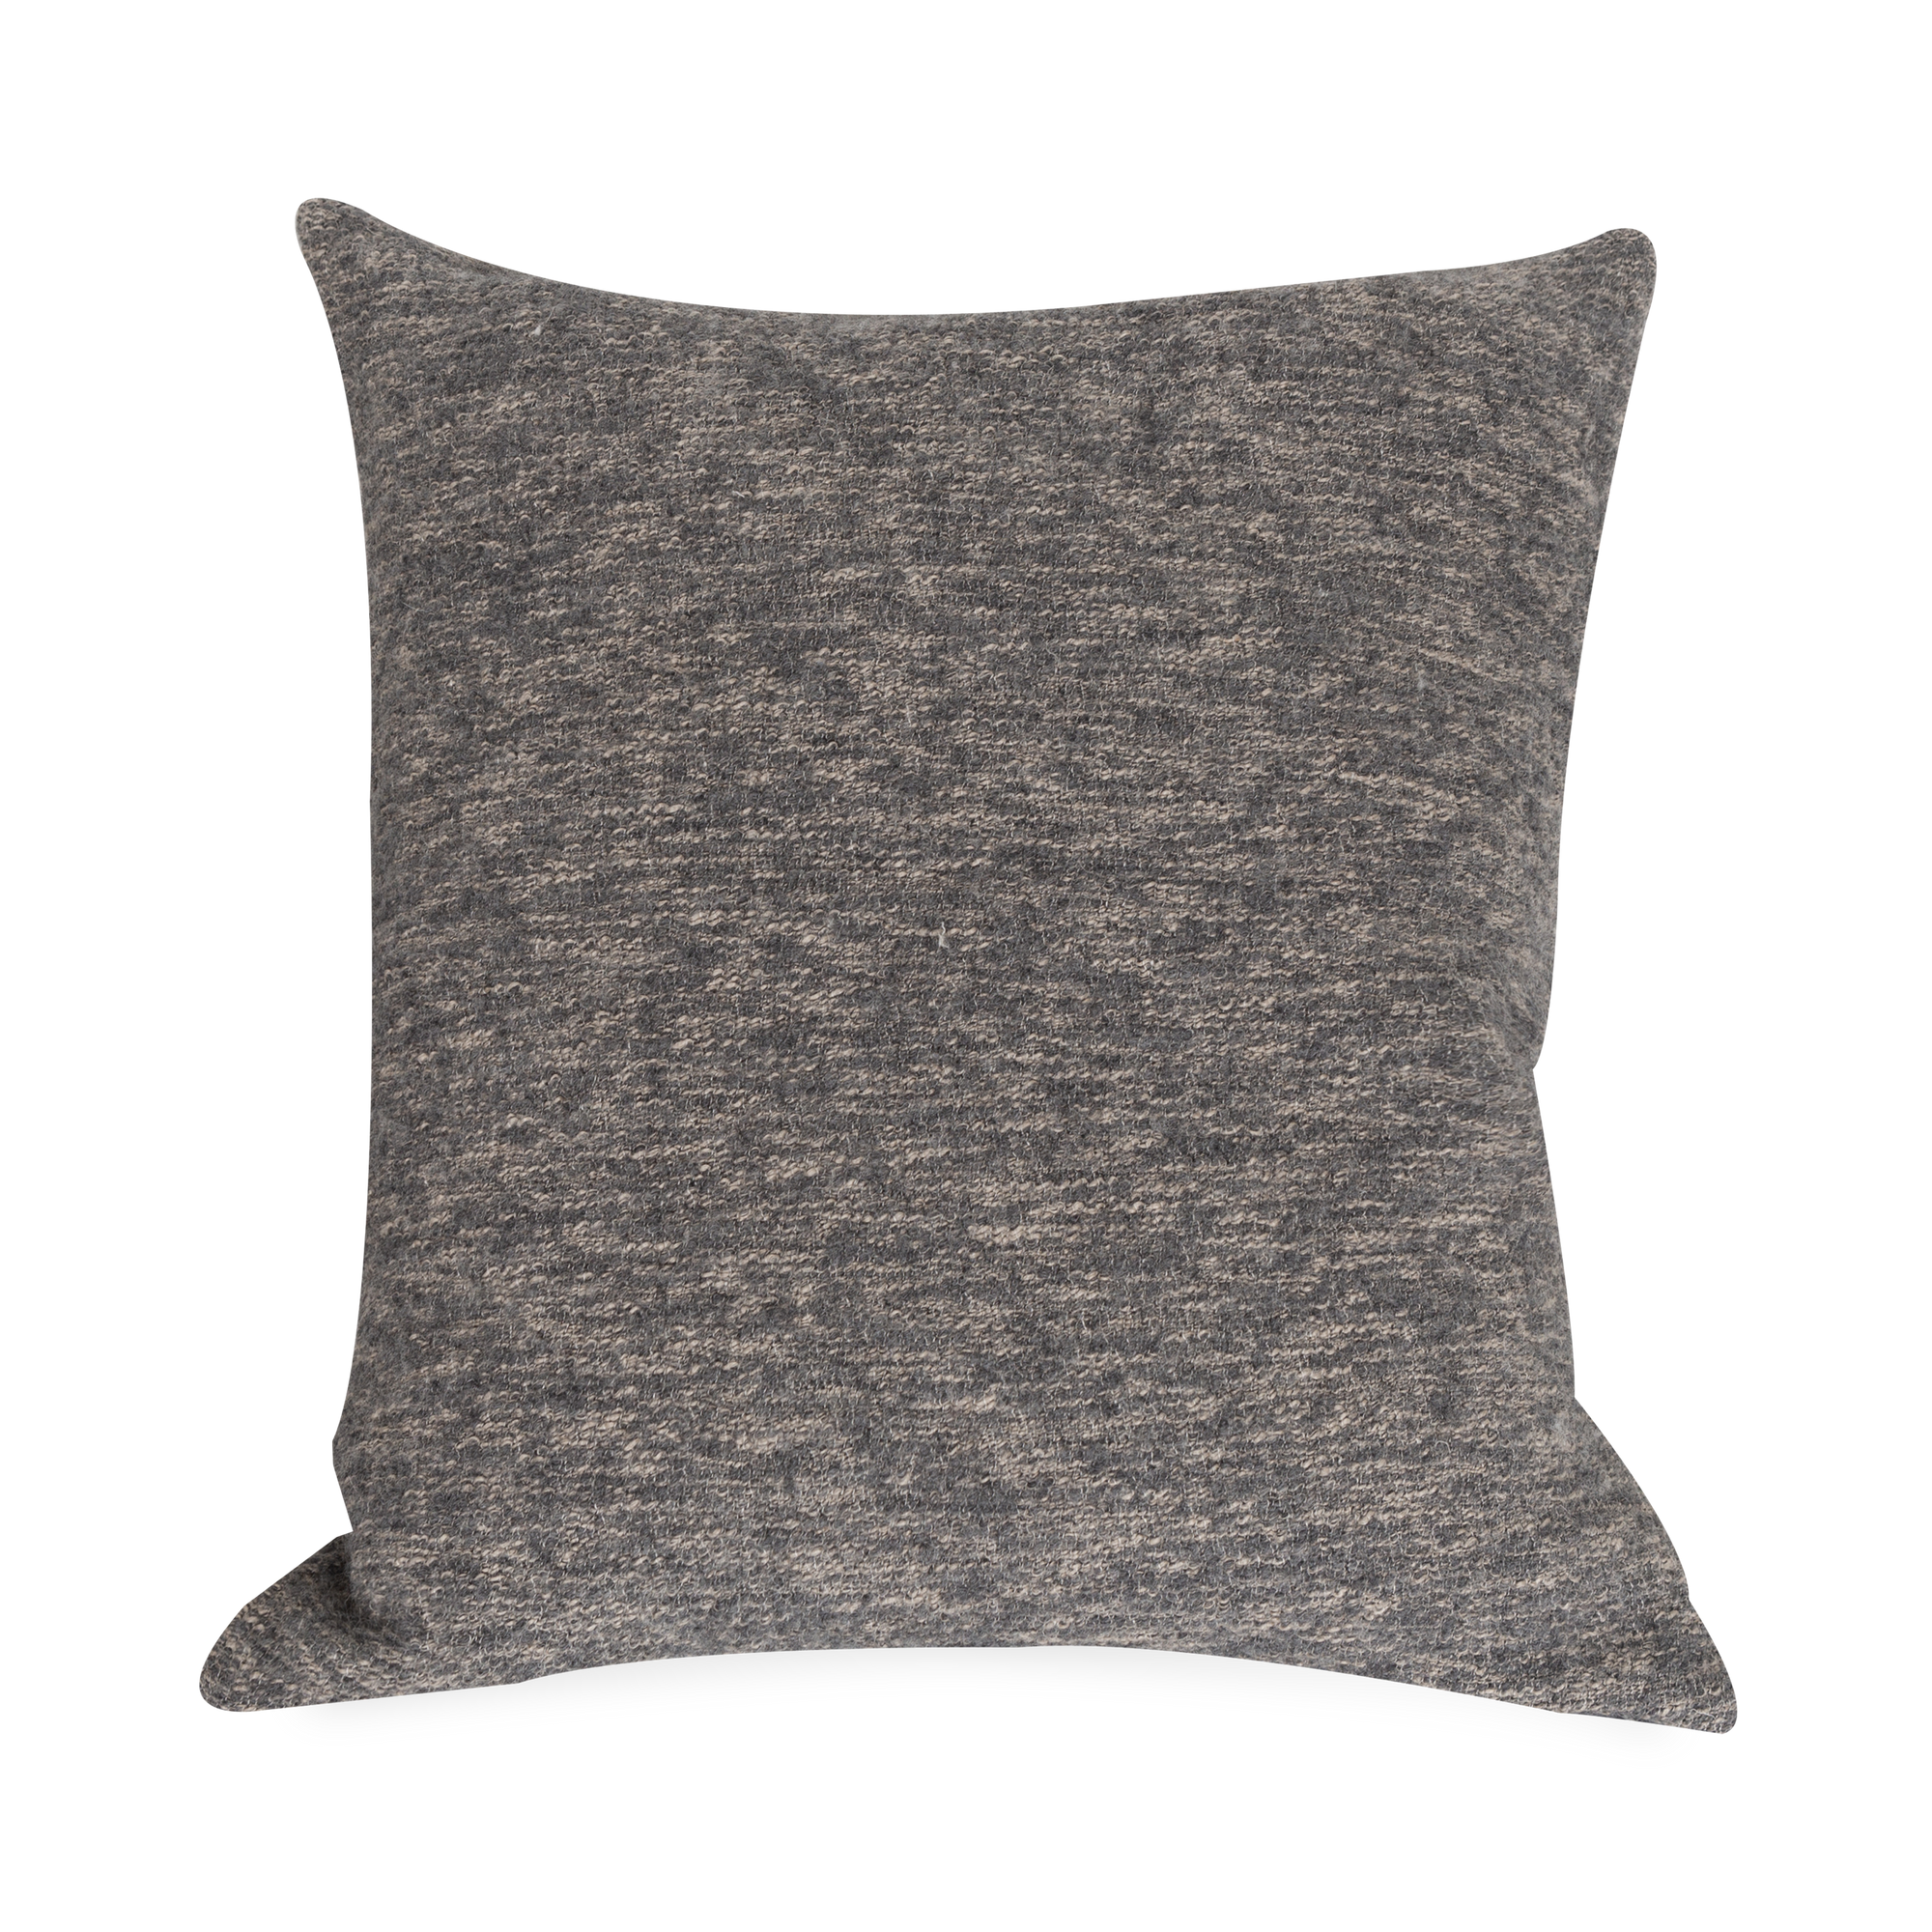 Crafted in Italy, this Nubby Pillow is made of wool and linen and adds textural interest.